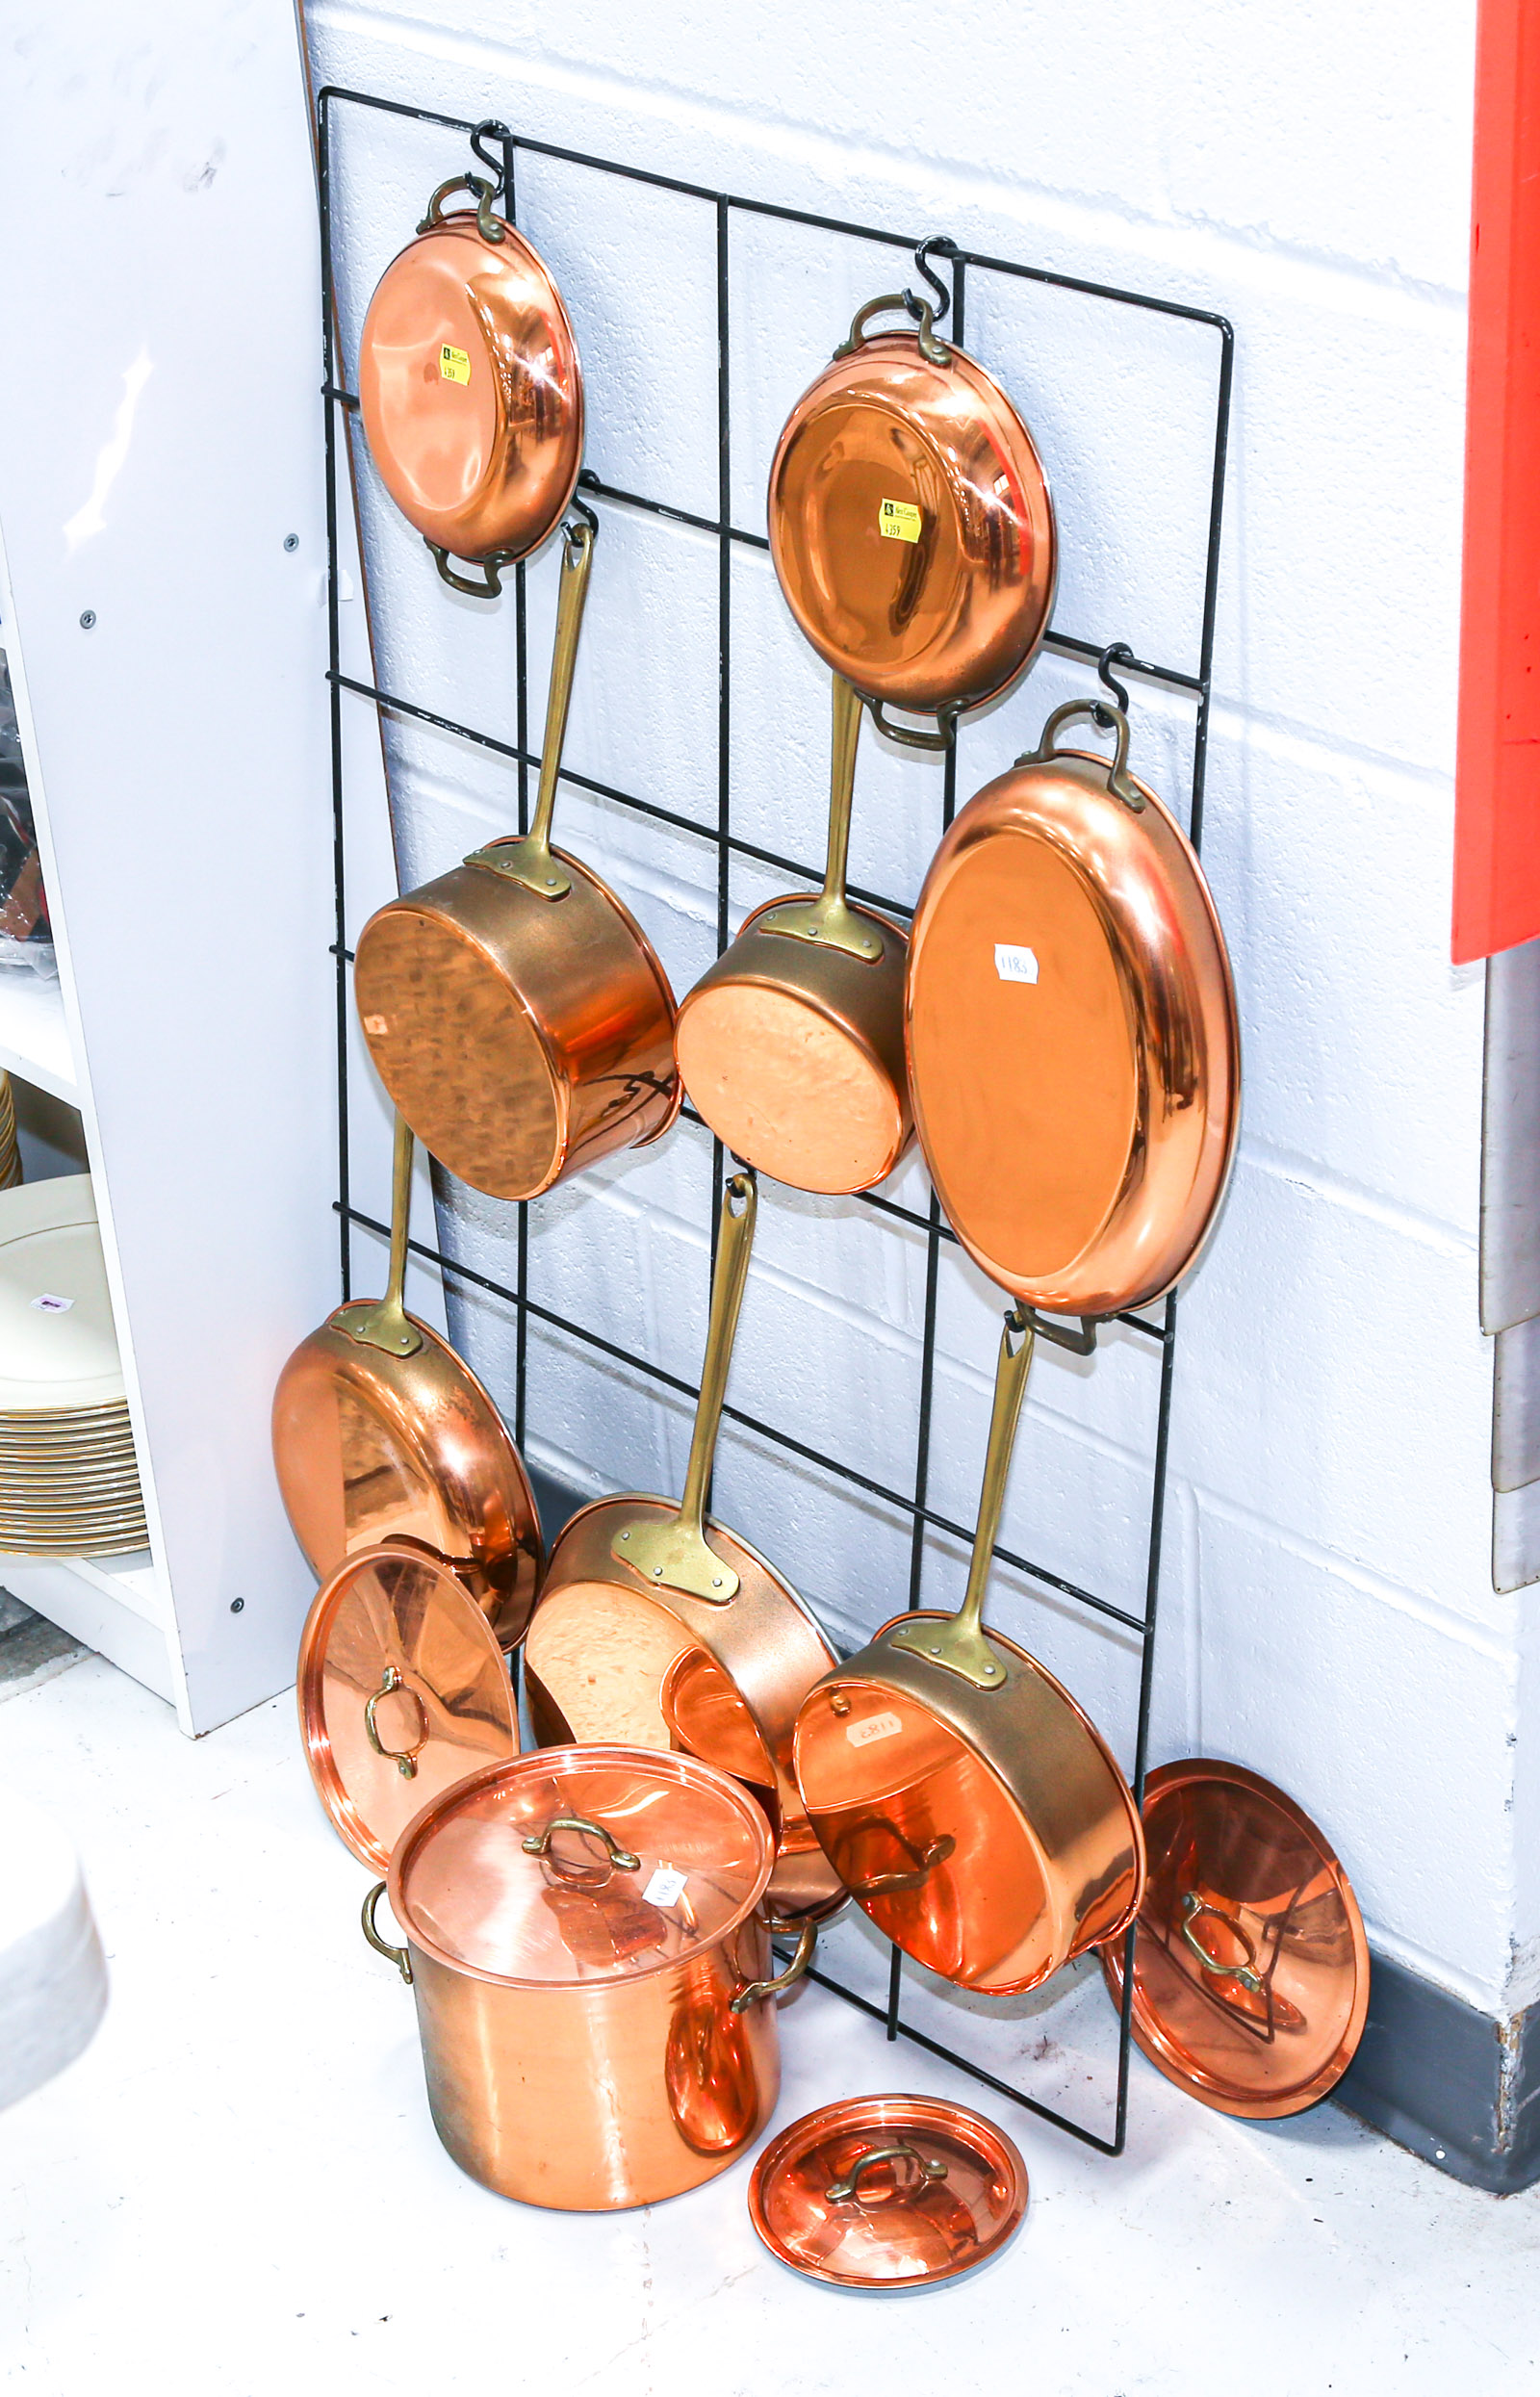 NINE COPPER COOKING POTS WITH IRON DISPLAY